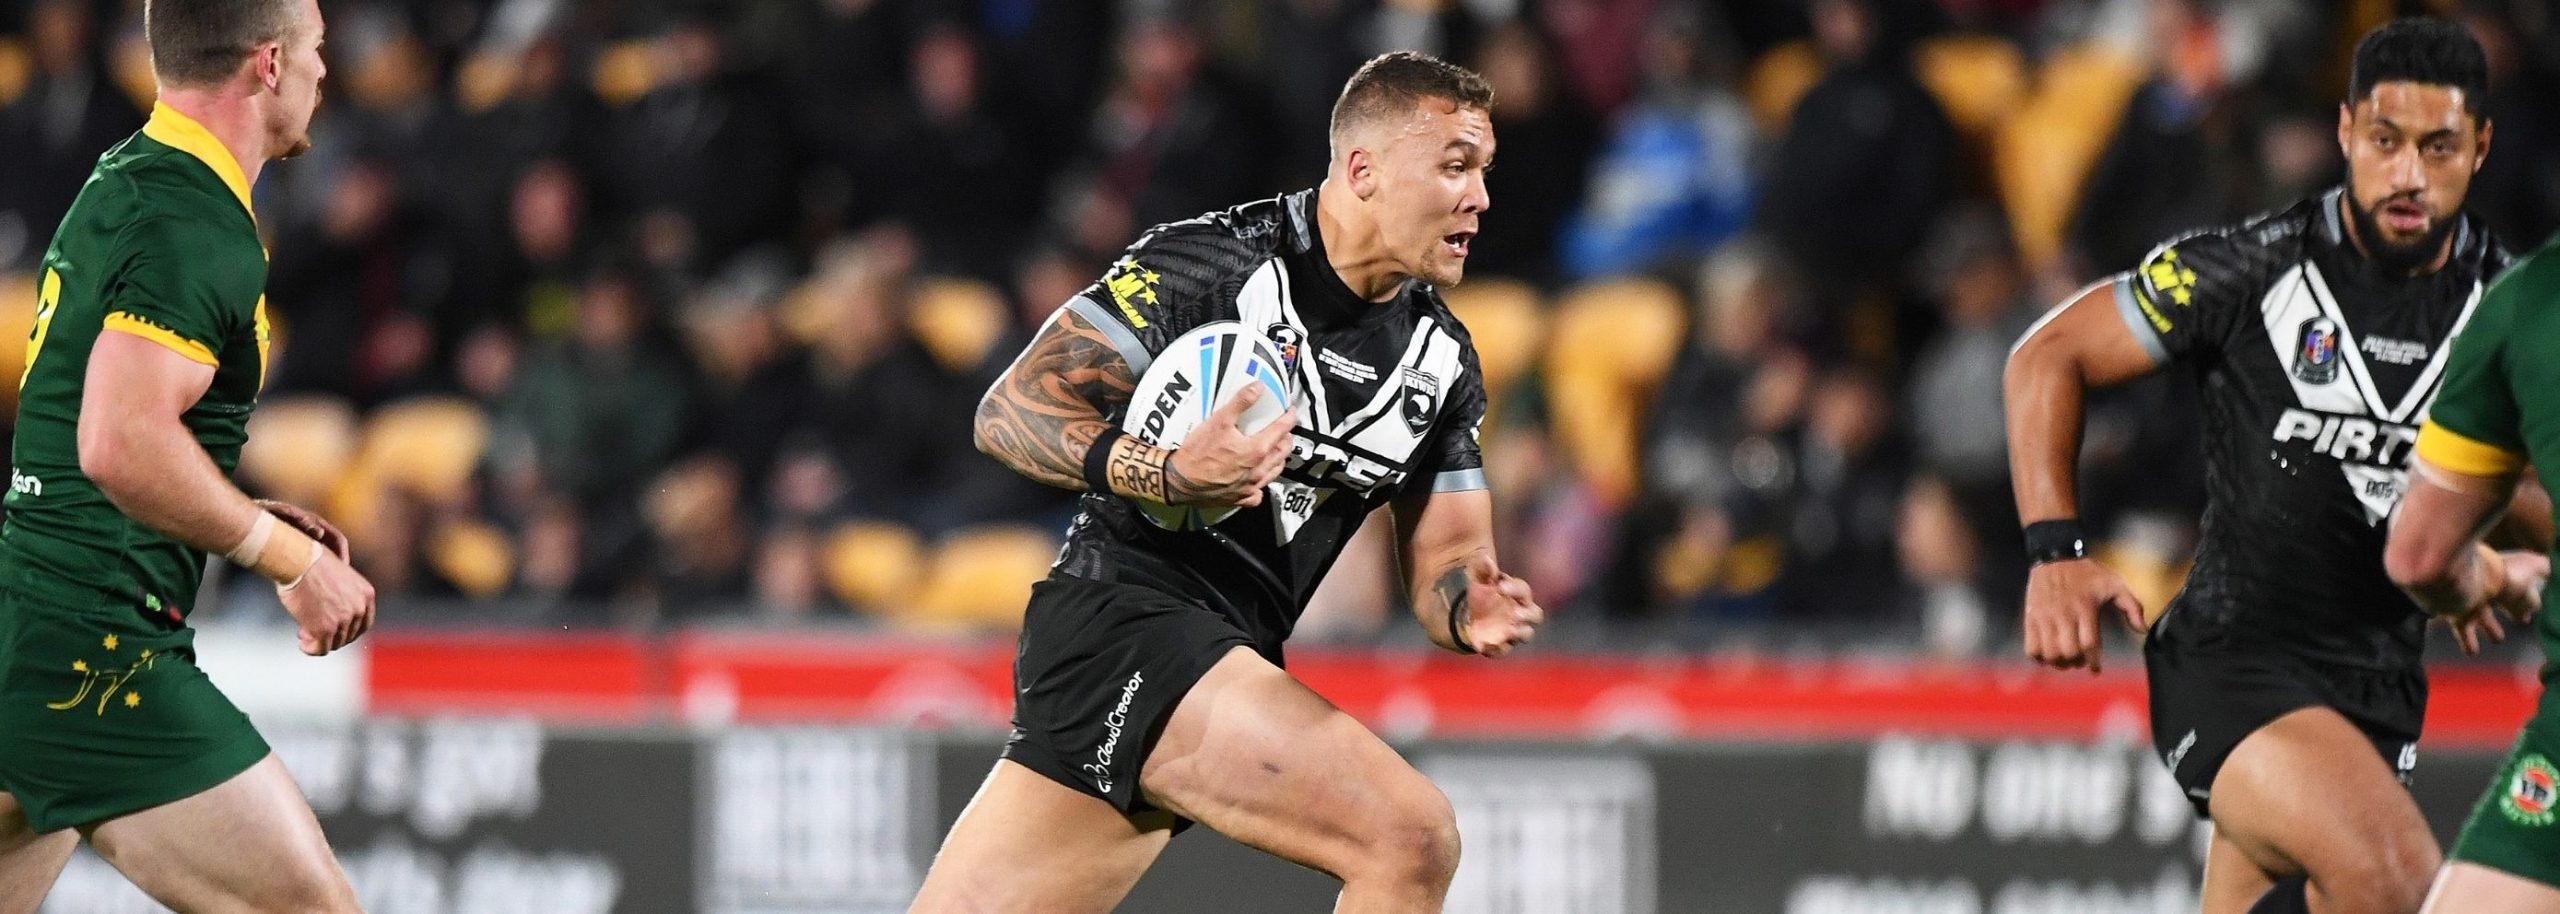 Kiwis to watch for in the 2021 NRL Grand Final